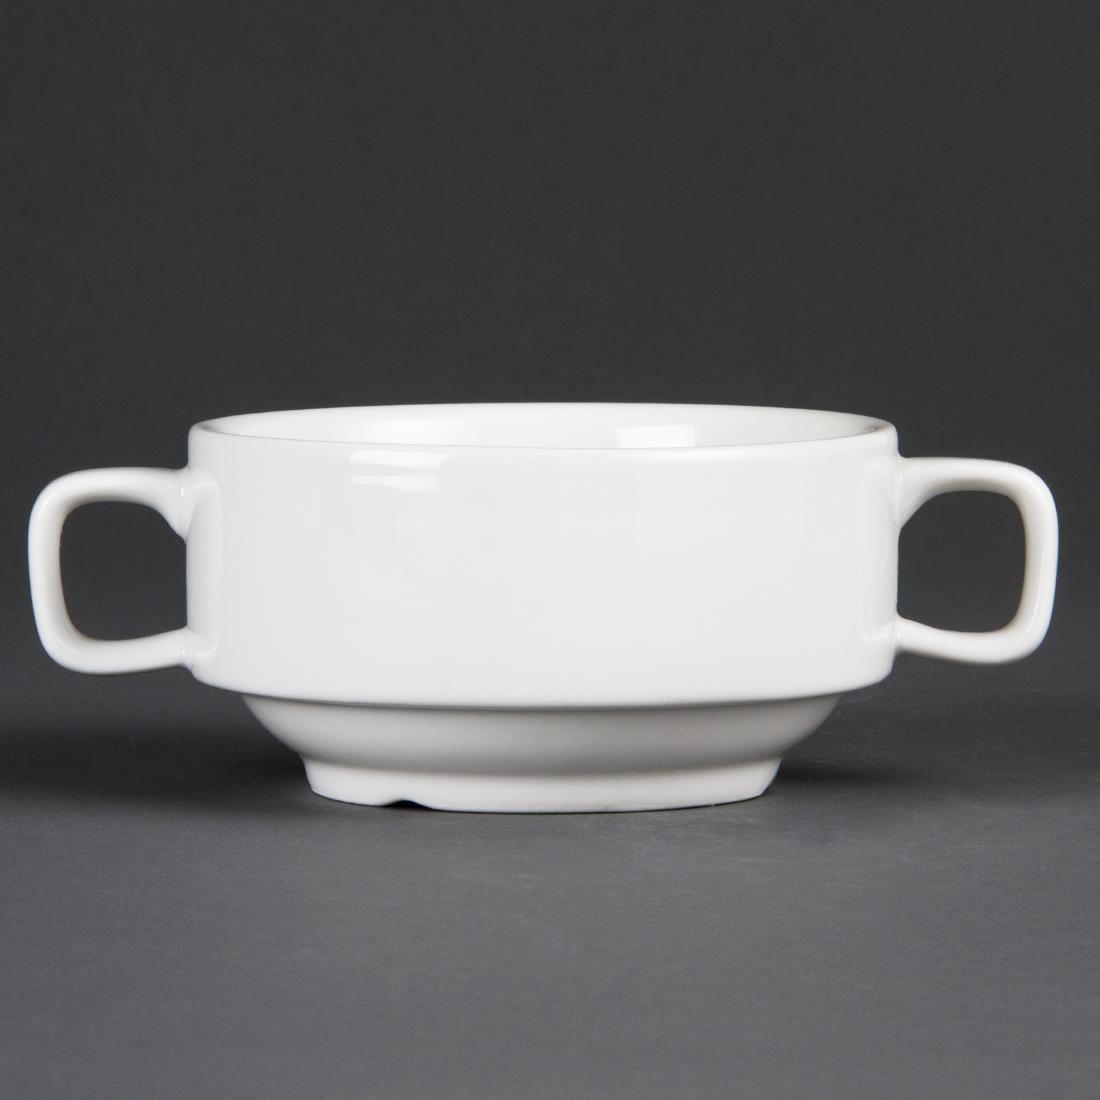 Olympia Whiteware Soup Bowls With Handles 400ml (Pack of 6) - C239  - 1